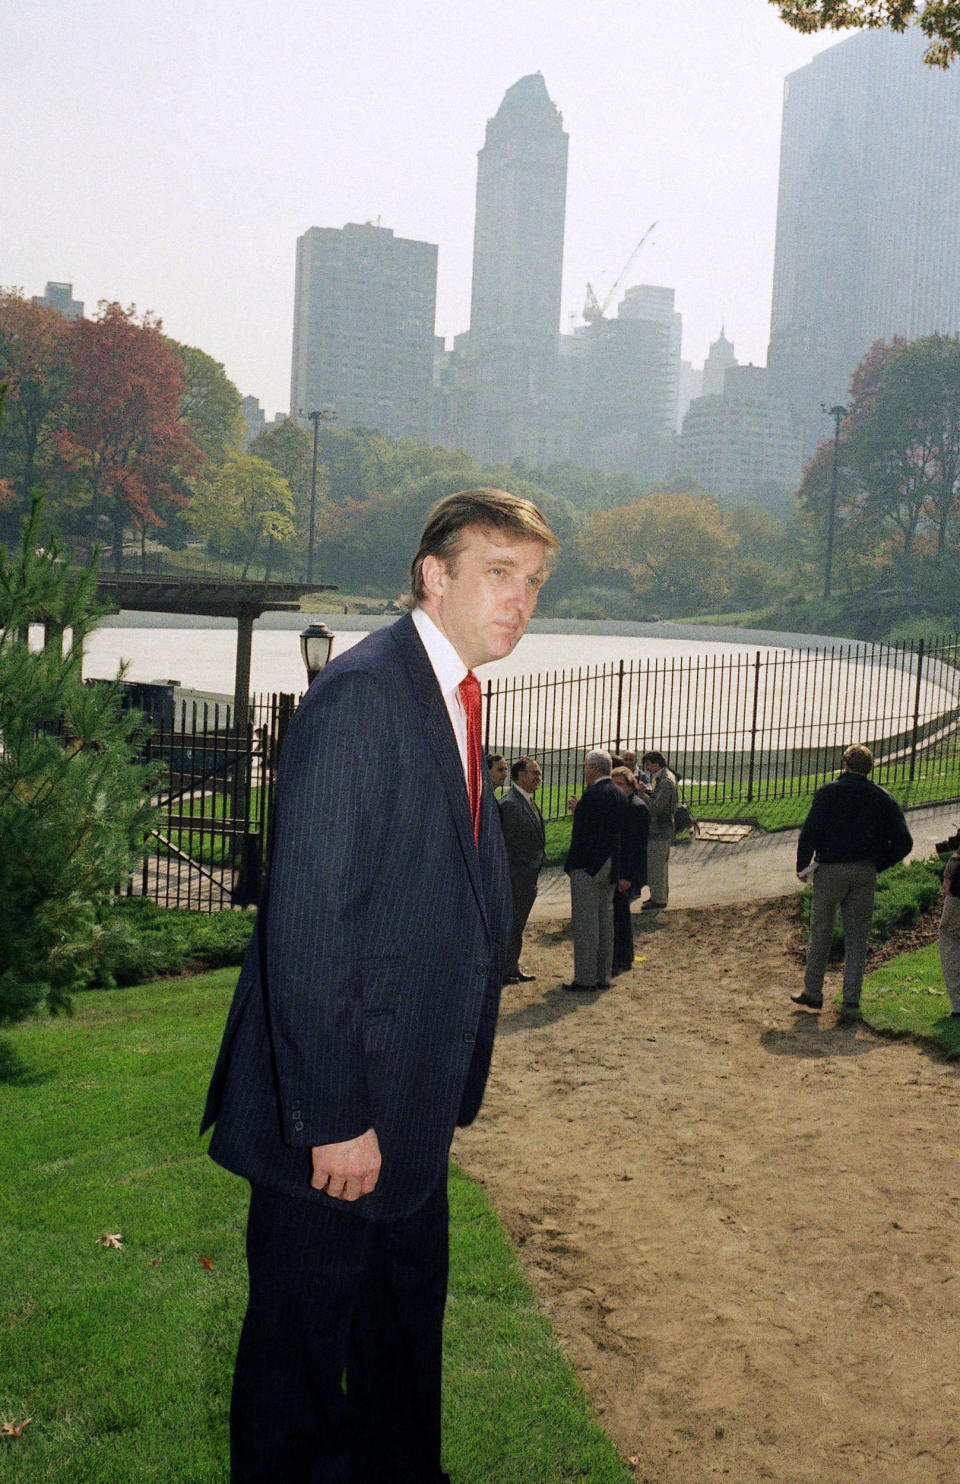 FILE - In this Oct. 23, 1986, file photo, Donald Trump is photographed in New York's Central Park, in front of the Wollman Skating Rink, which he offered to rebuild after the city's renovation effort had come to a standstill. As President-elect Trump came of age as a public figure during the 1980s, he opened up a refurbished Grand Hyatt on 42nd Street, took over the long-stalled renovation of Central Park’s ice skating rink and purchased the New York-area team in the fledgling United States Football League. (AP Photo/Mario Suriani, File)